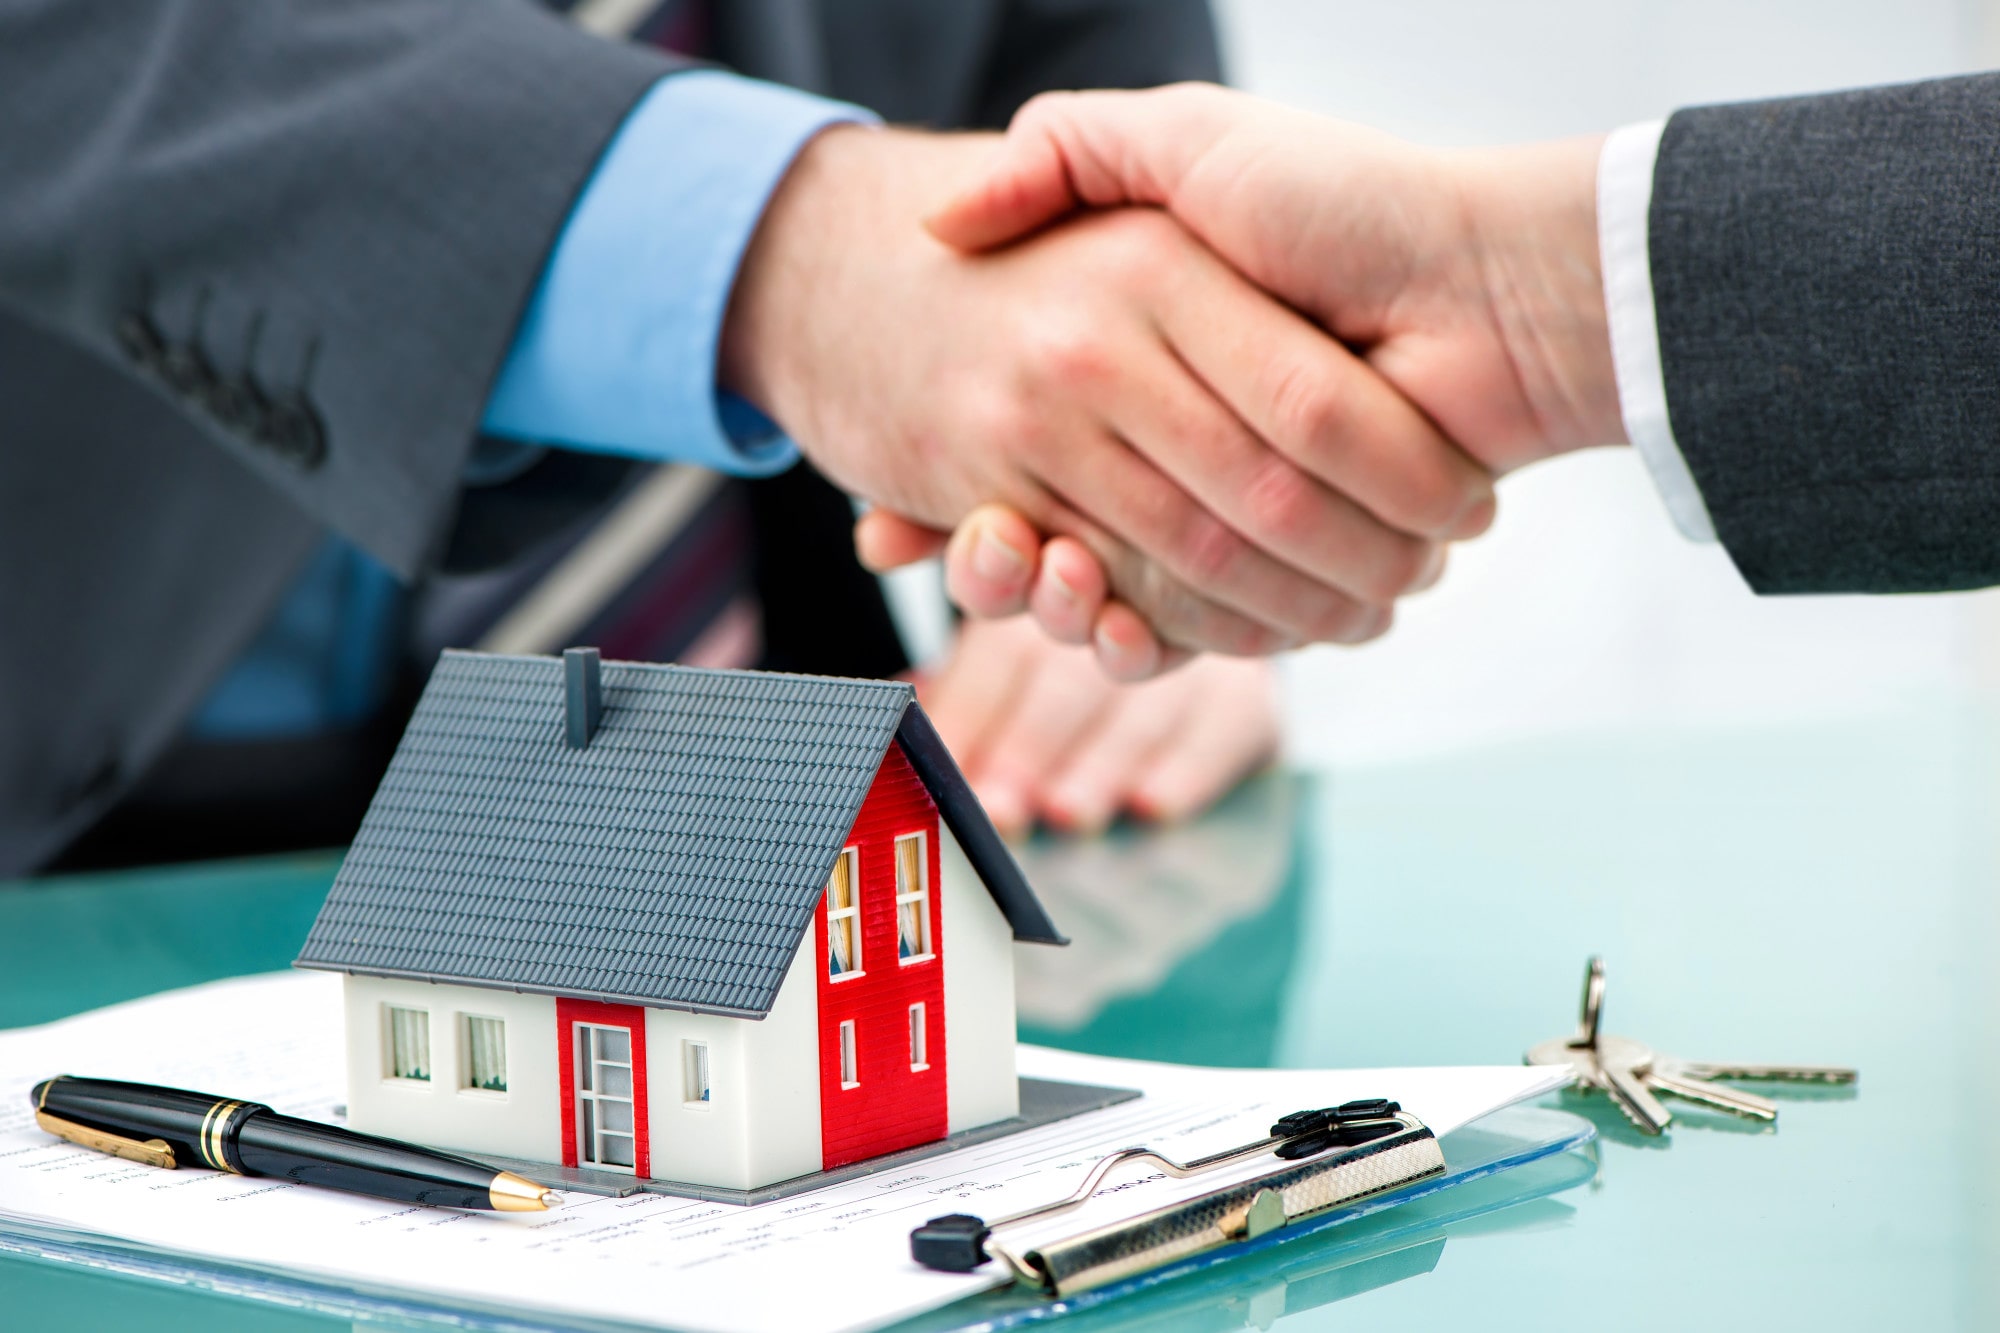 A Small Investment Can Get You Started as a Landlord